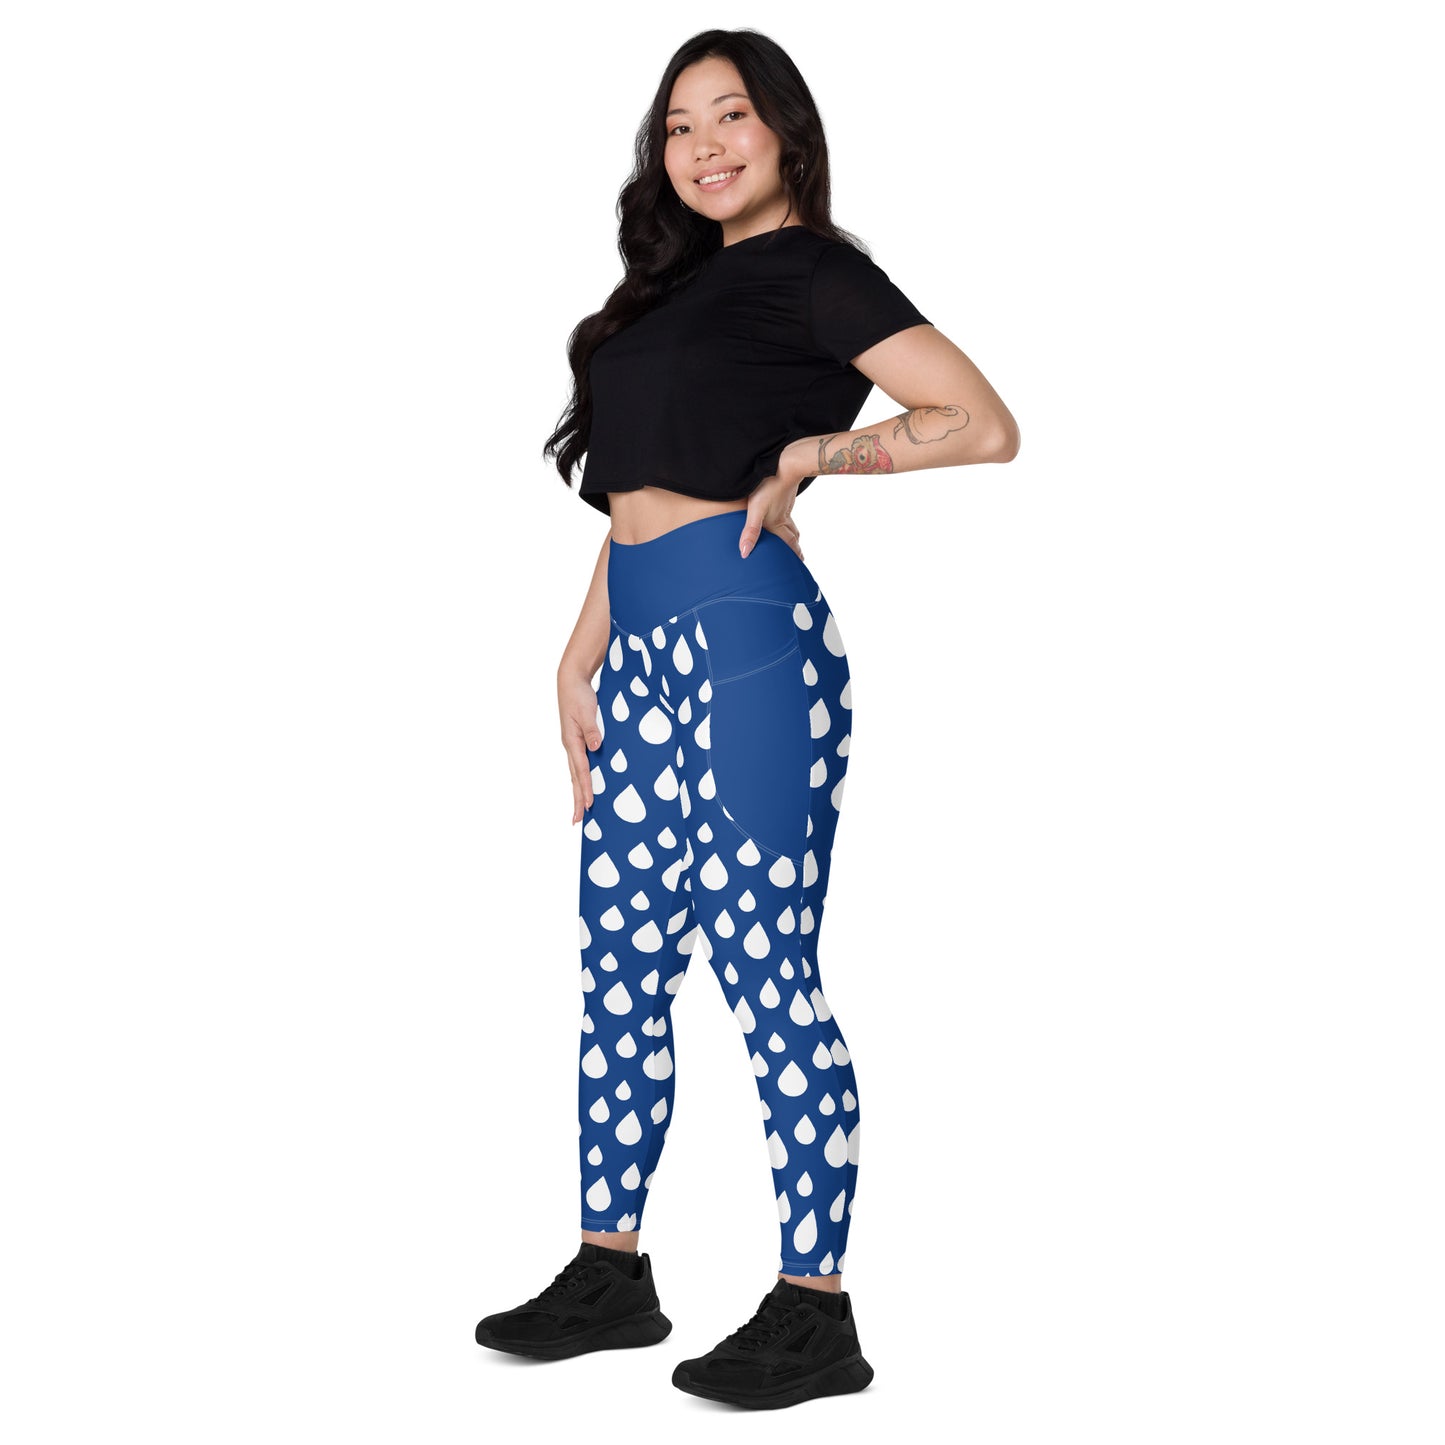 Dotted Yoga Leggings with pockets - Sport Finesse